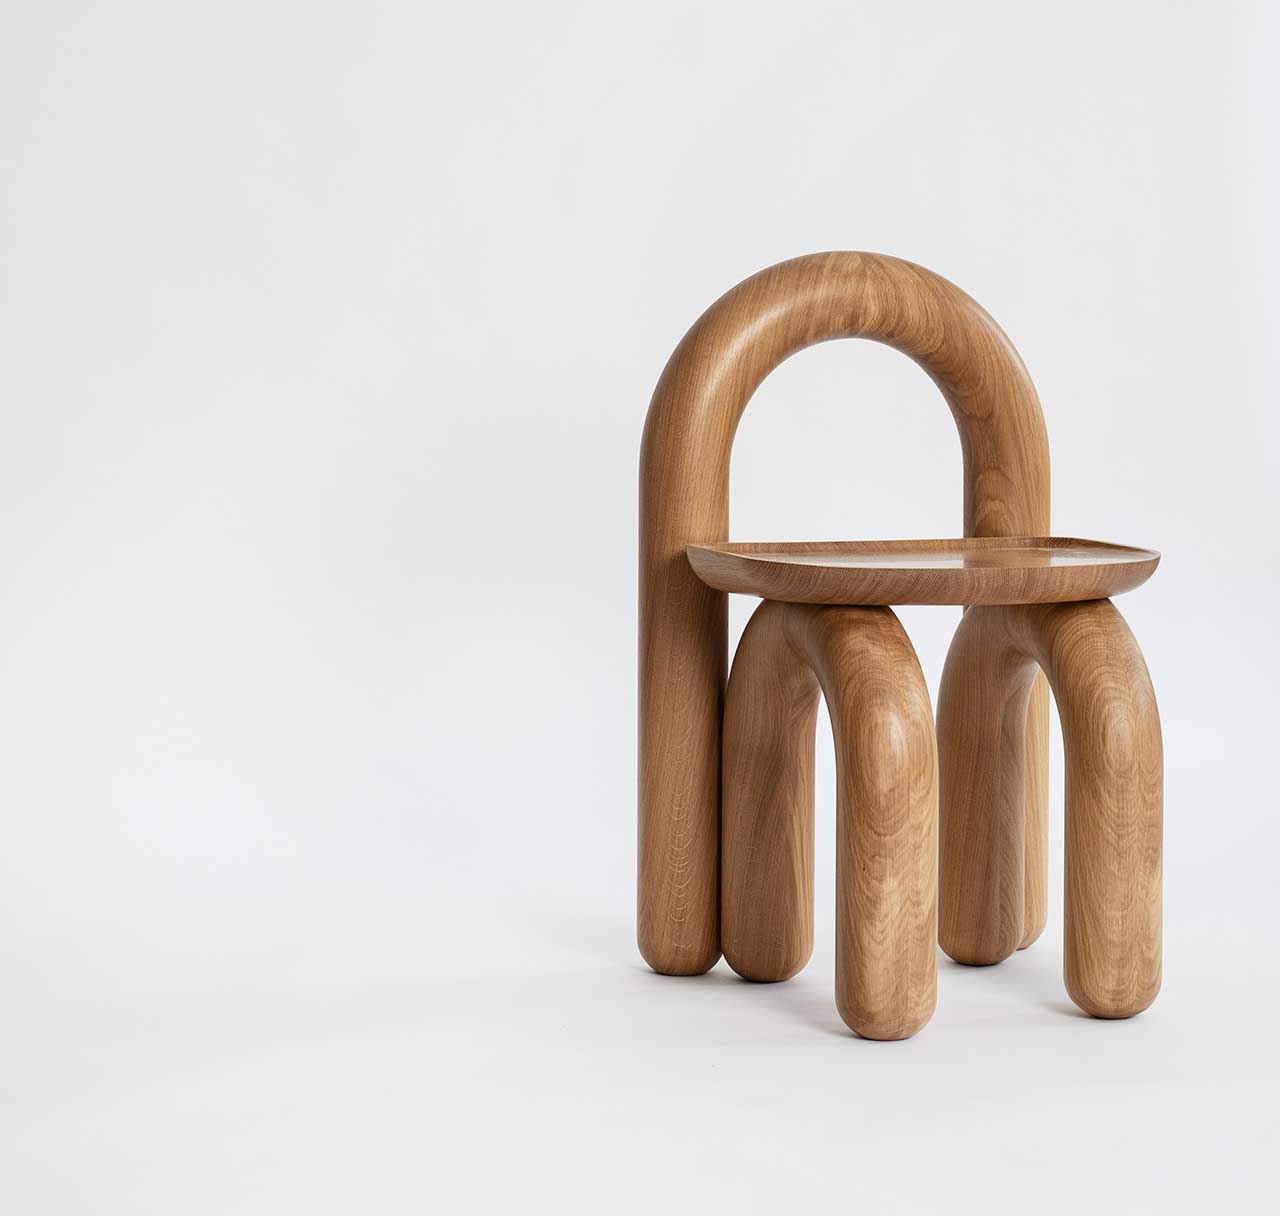 Comparing Conditions Explores the Traditional Form of a Chair